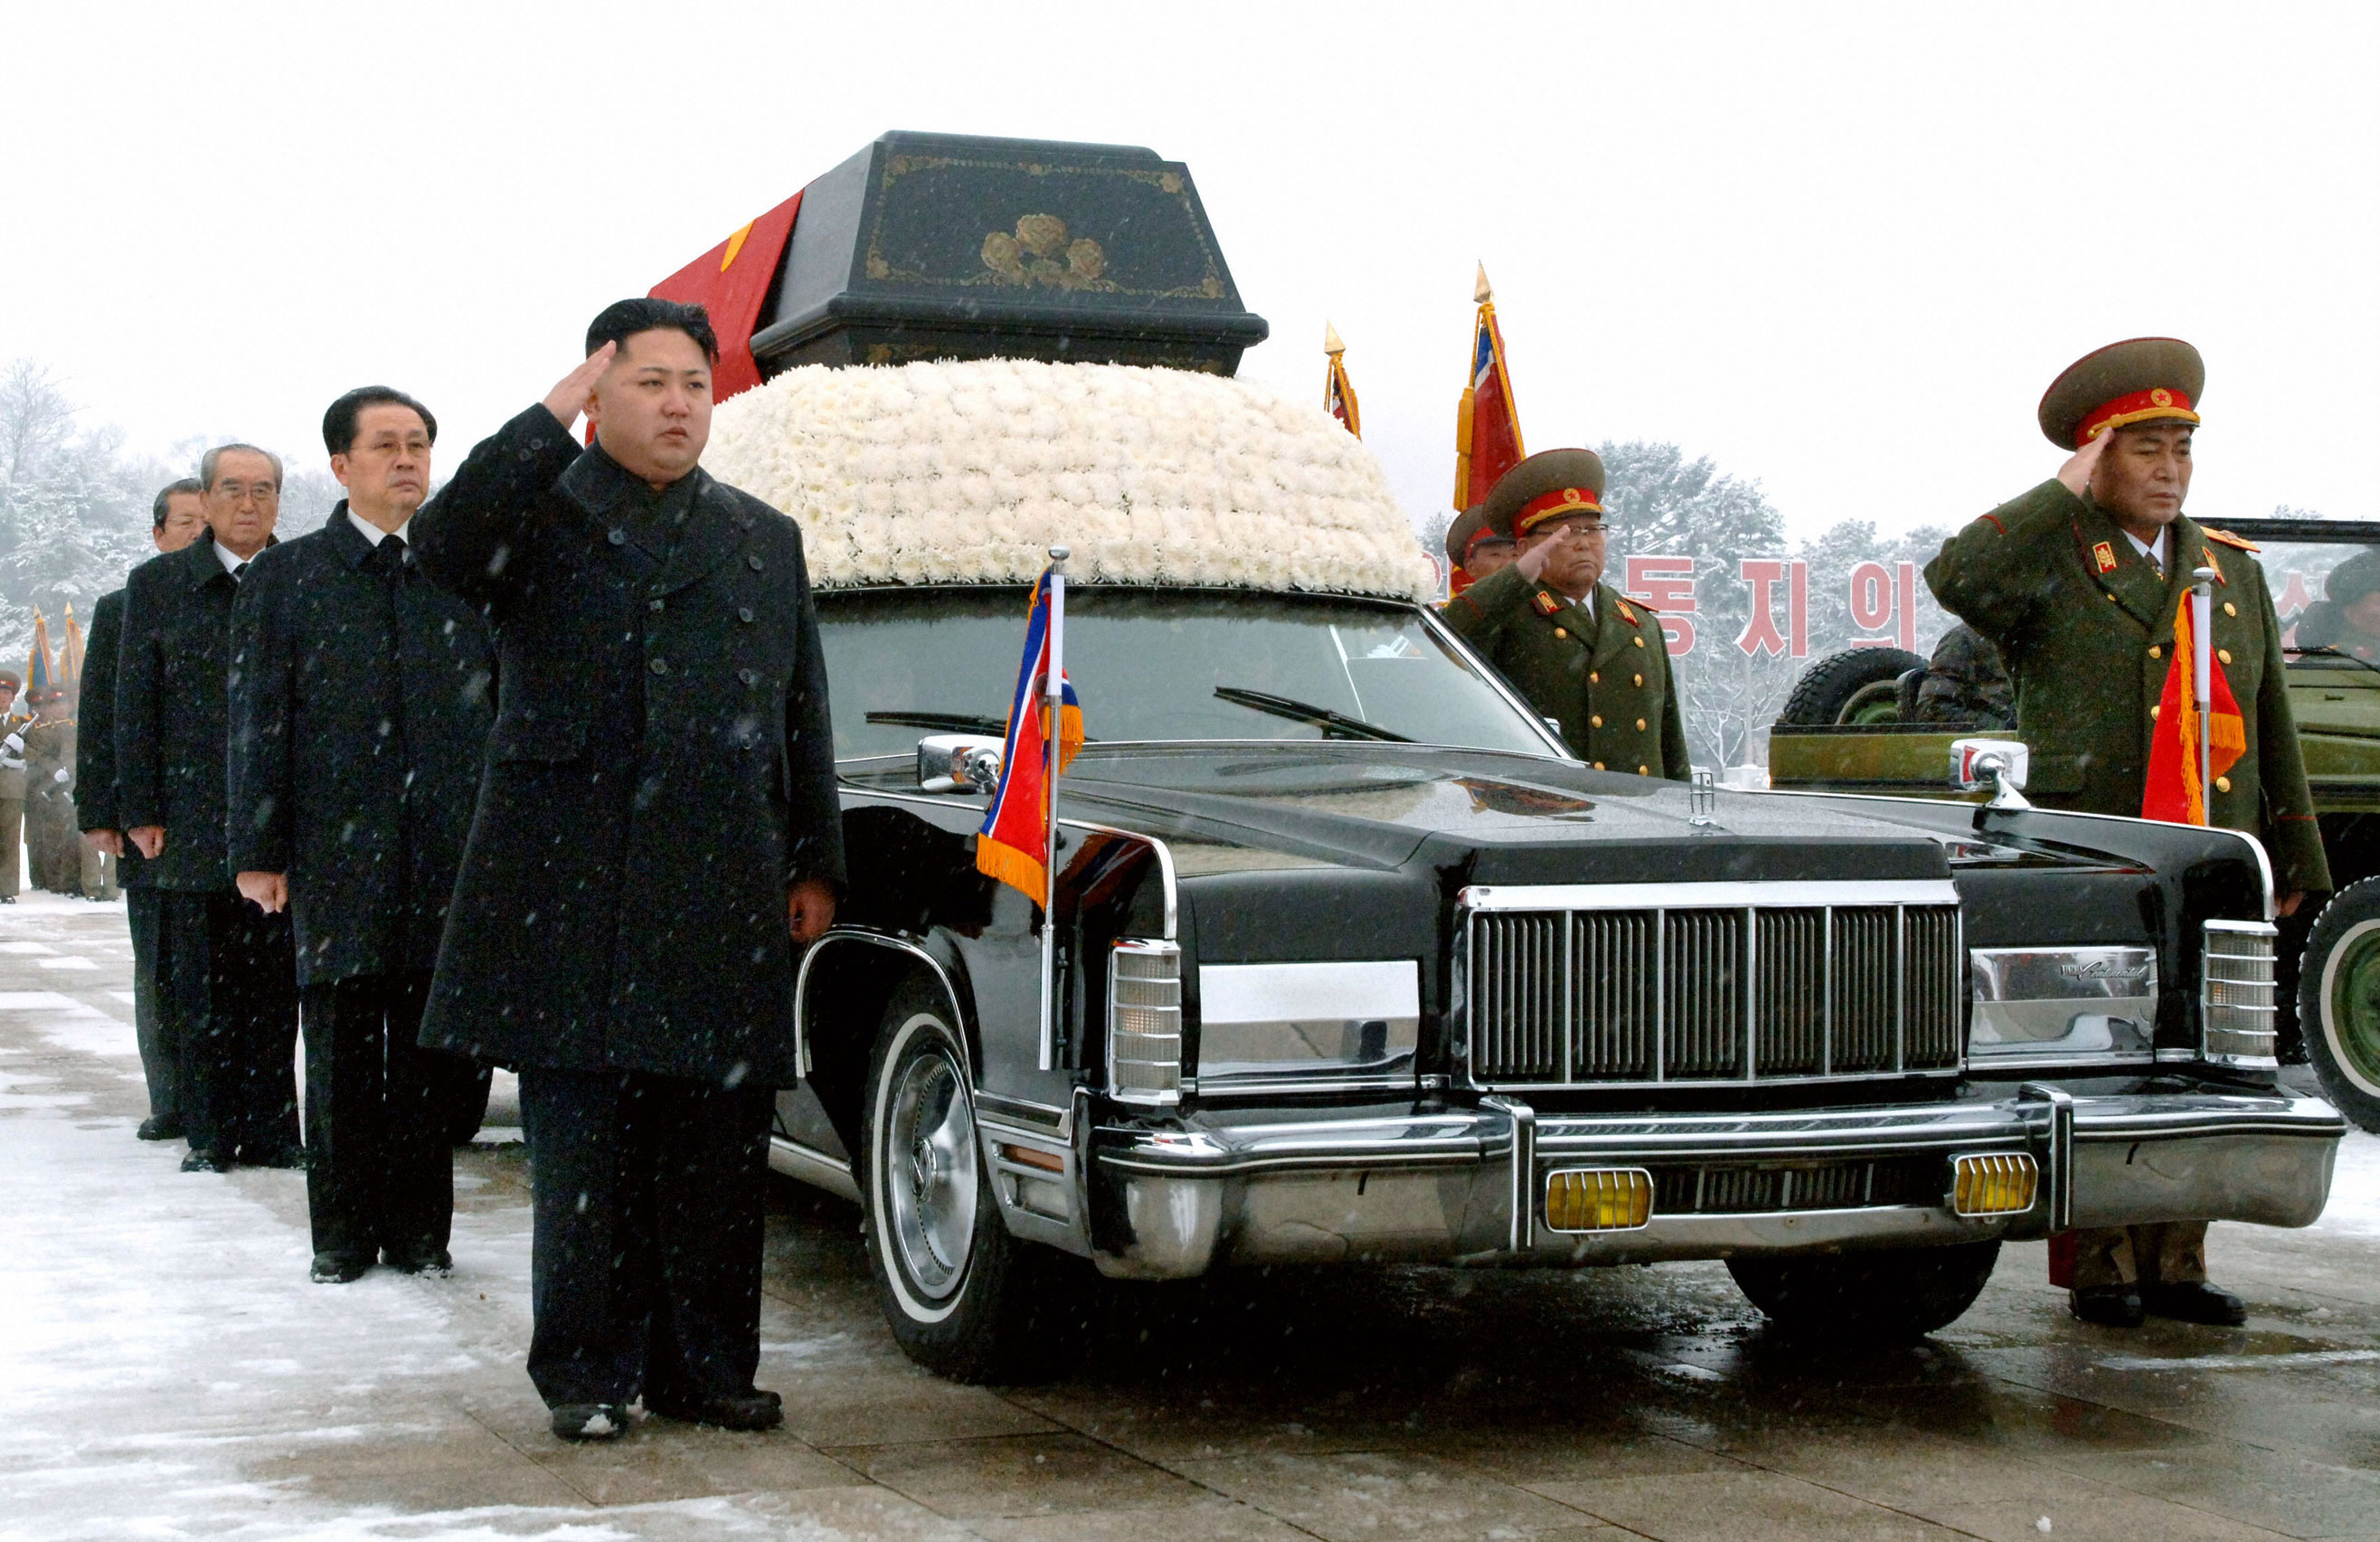 Kim Jong Un (L front), son of the late North Korean leader Kim Jong Il and his successor, salutes beside the hearse carrying the coffin of the elder Kim in Pyongyang on December 28, 2011. 